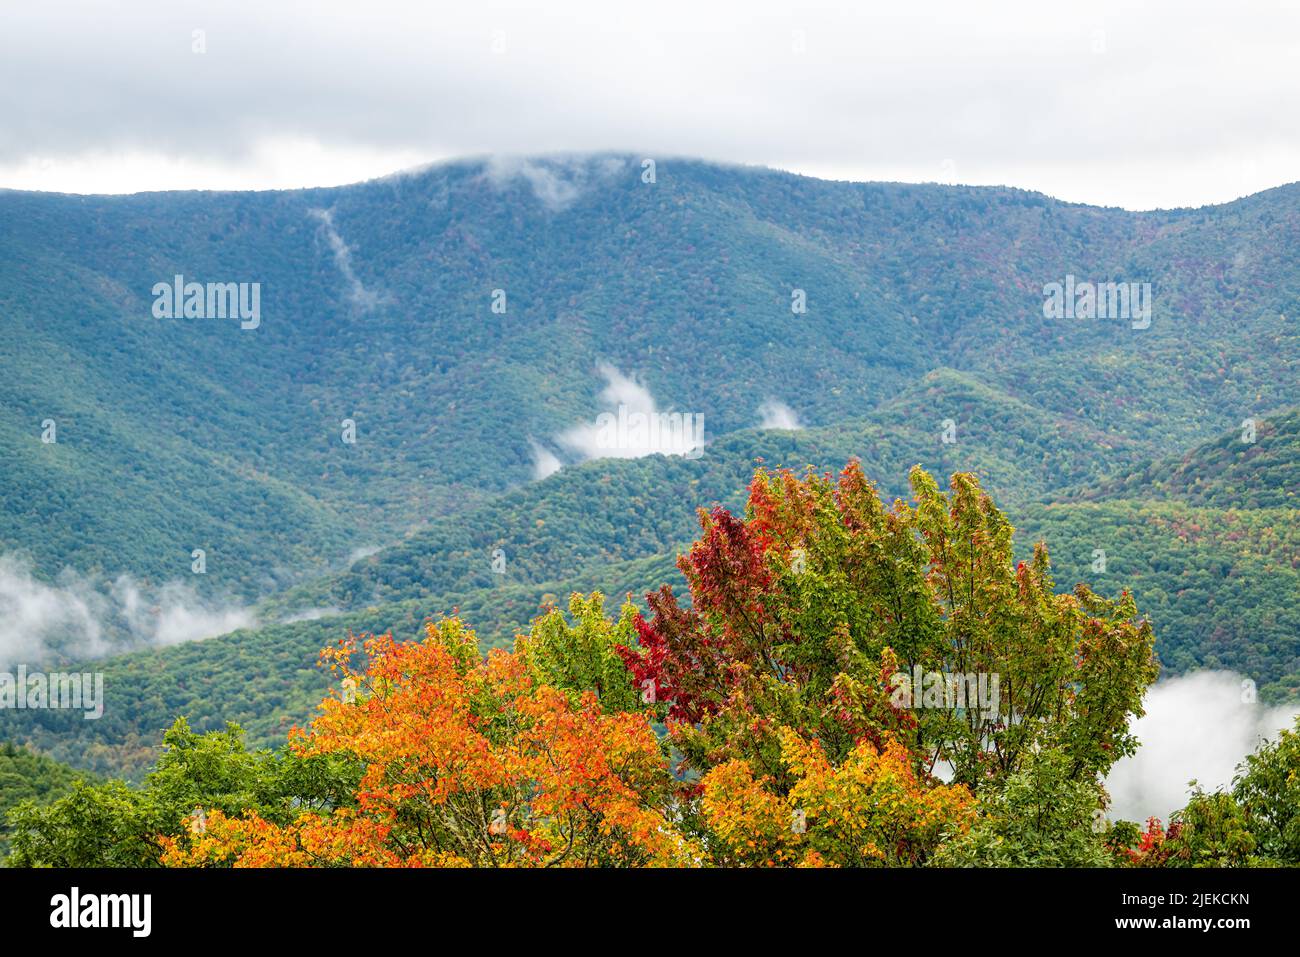 High angle aerial view from near Richland Balsam overlook on Blue Ridge Appalachian mountains parkway in North Carolina with fall leaf colorful foliag Stock Photo